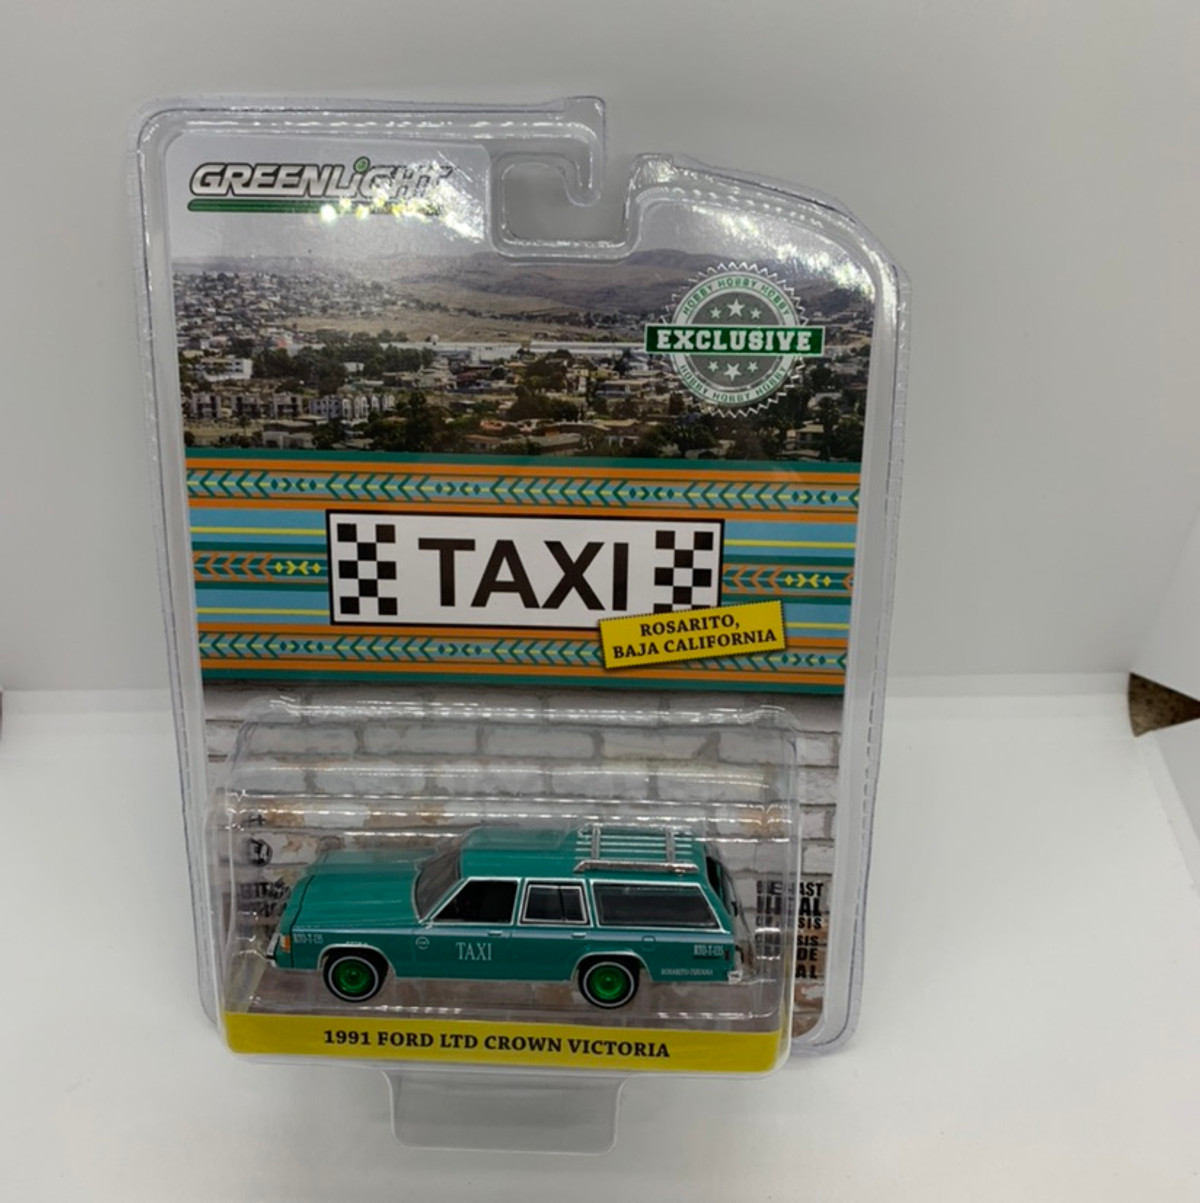 Greenlight Green Machine 1991 Ford LTD Crown Victoria Taxi Hobby Exclusive